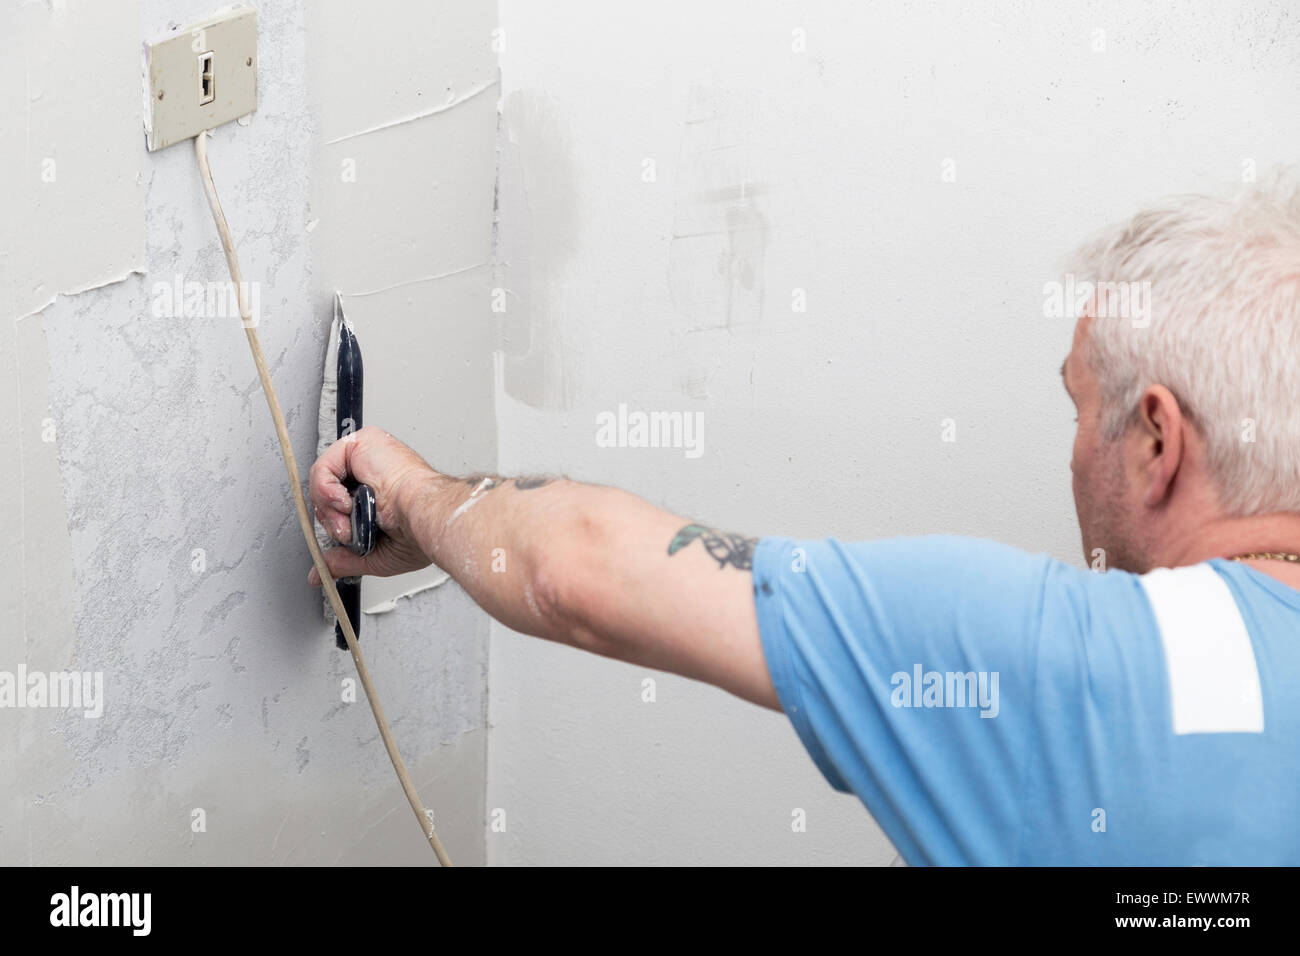 Man applying spackle to a concrete wall before painting it Stock Photo